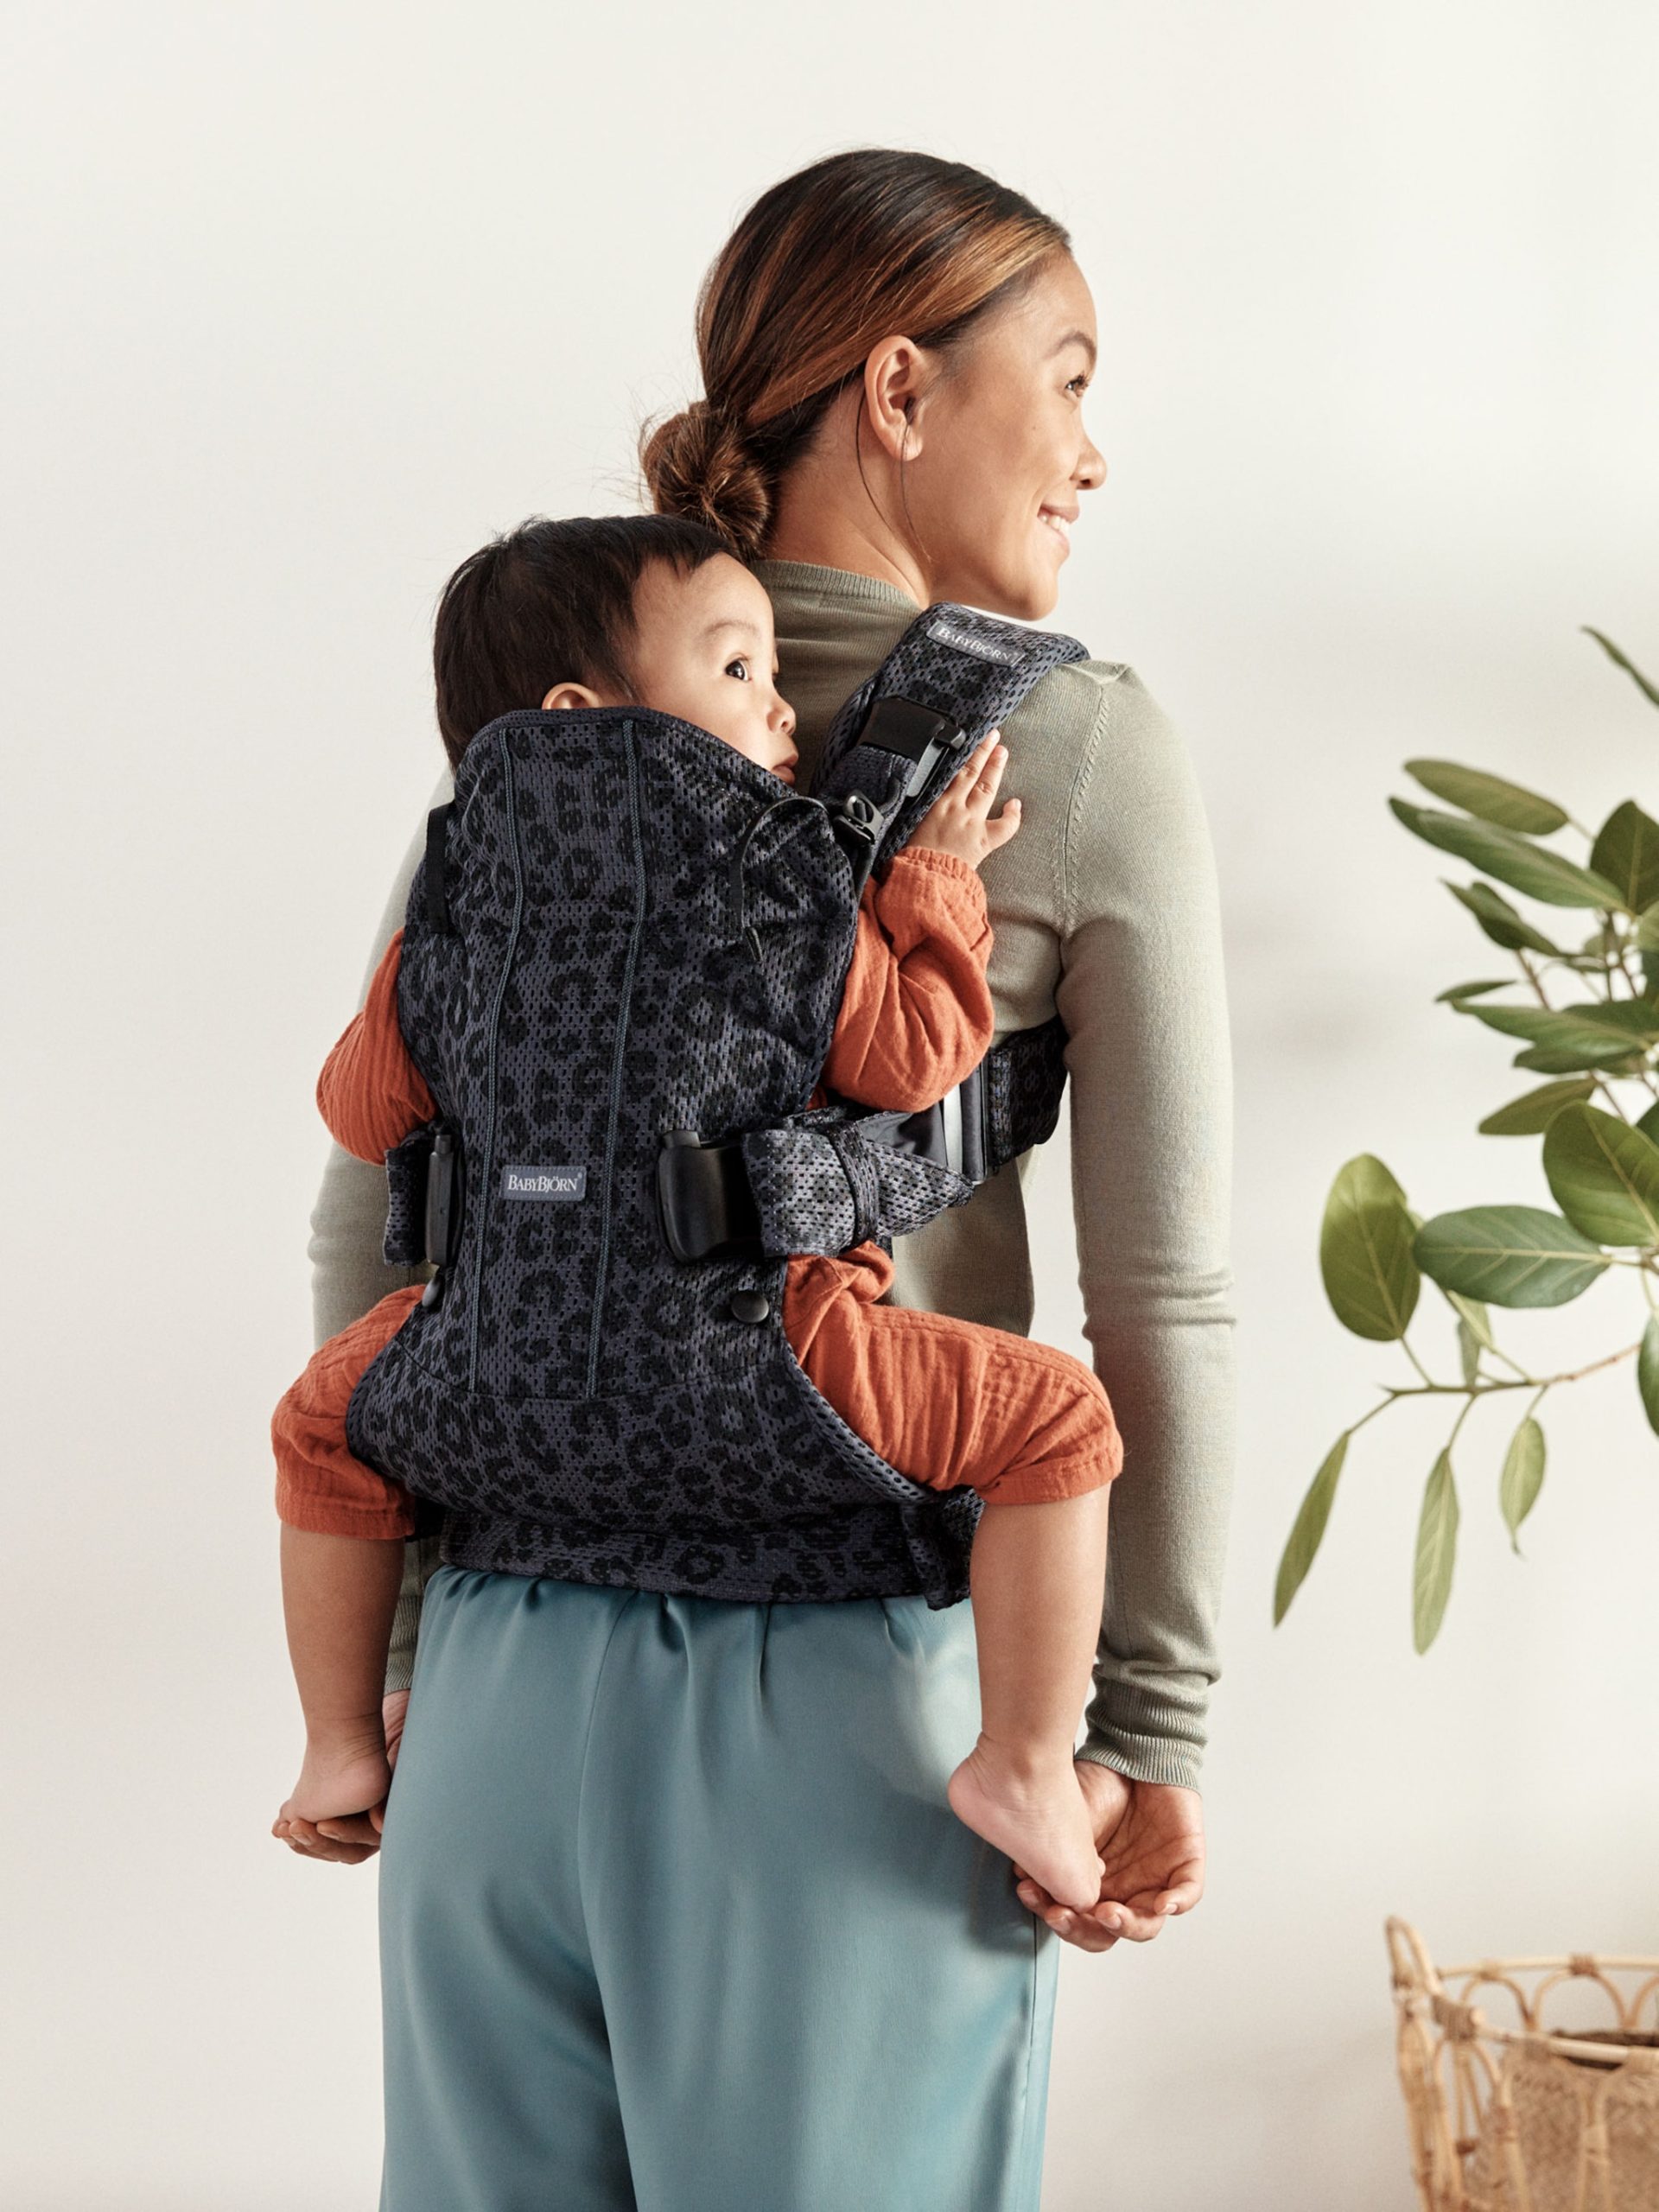 en-gb-098078-babybjorn-baby-carrier-one-air-anthracite-leopard-3d-mesh-08